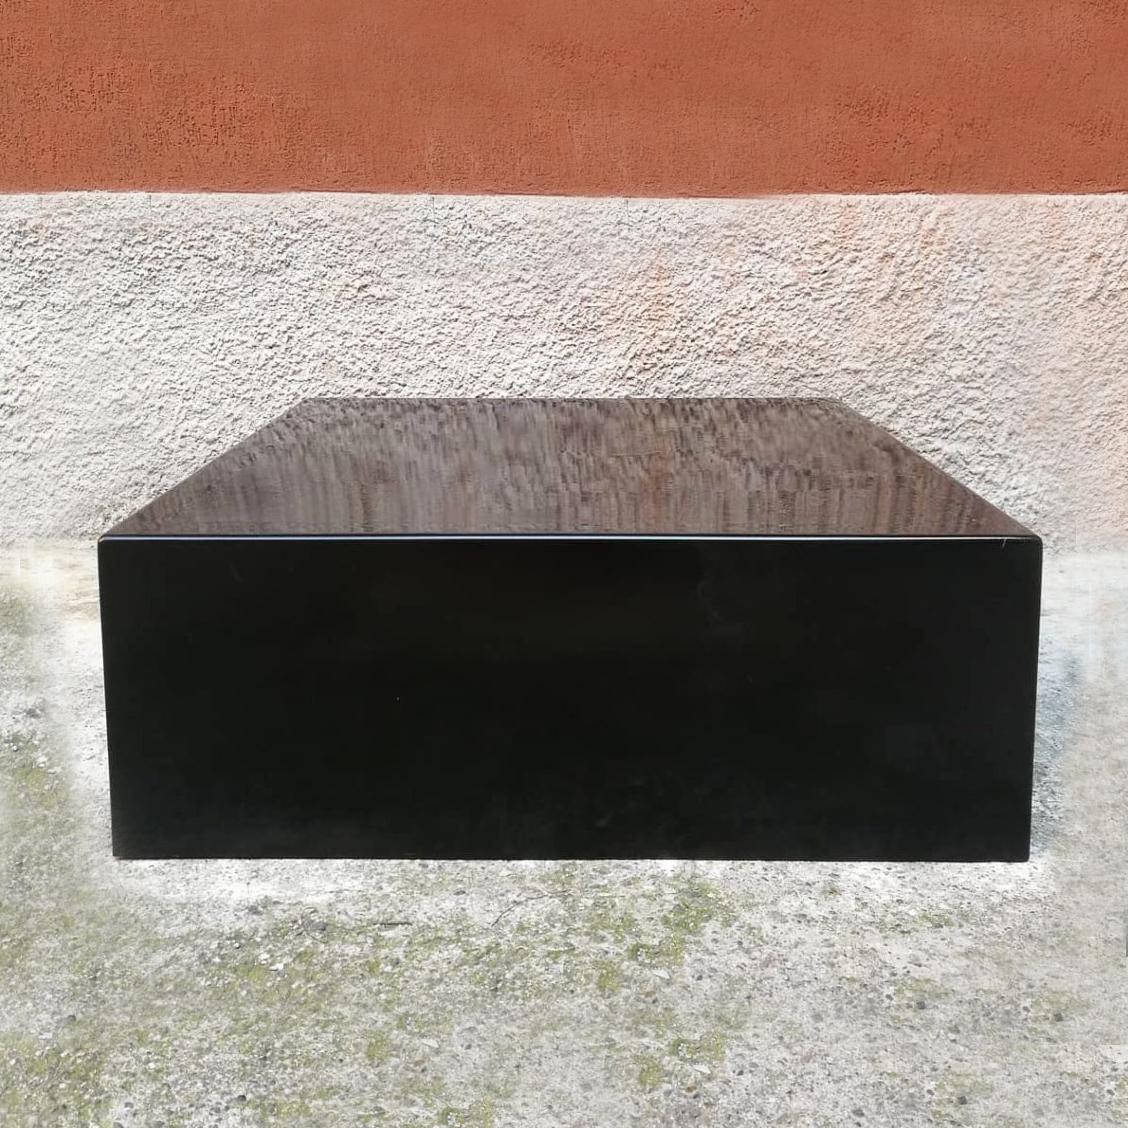 Italian Mid-Century Modern parallelepiped in glossy black plastic, 1970s
Parallelepiped in glossy black plastic.
A truly versatile piece of furniture, for display and otherwise.

Very good condition

Measures: 80 x 80 x 40 H.